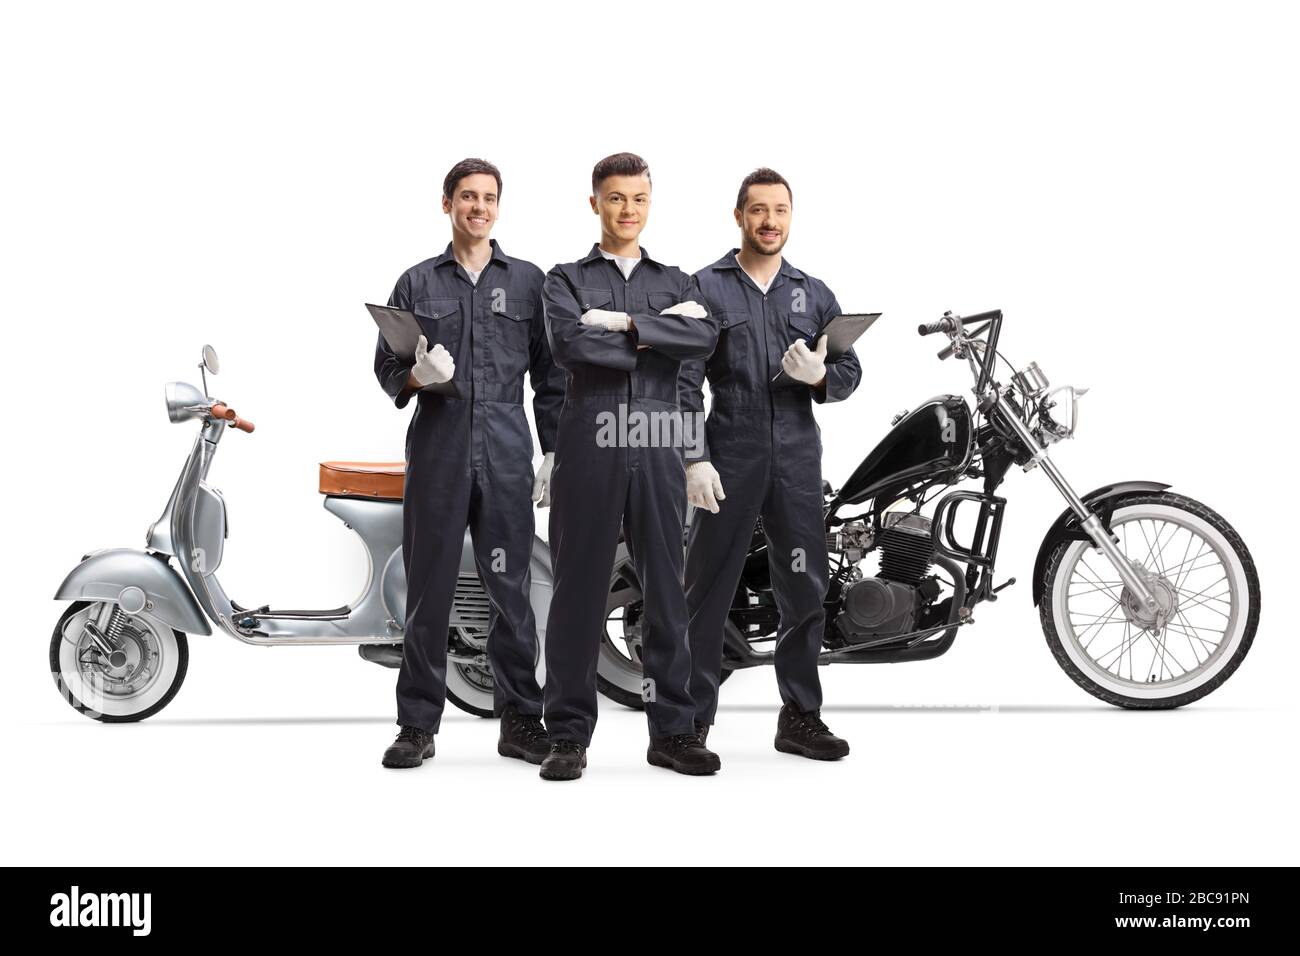 Full length portrait of motorcycle mechanic workers in uniforms posing next to motorbikes isolated on white background Stock Photo